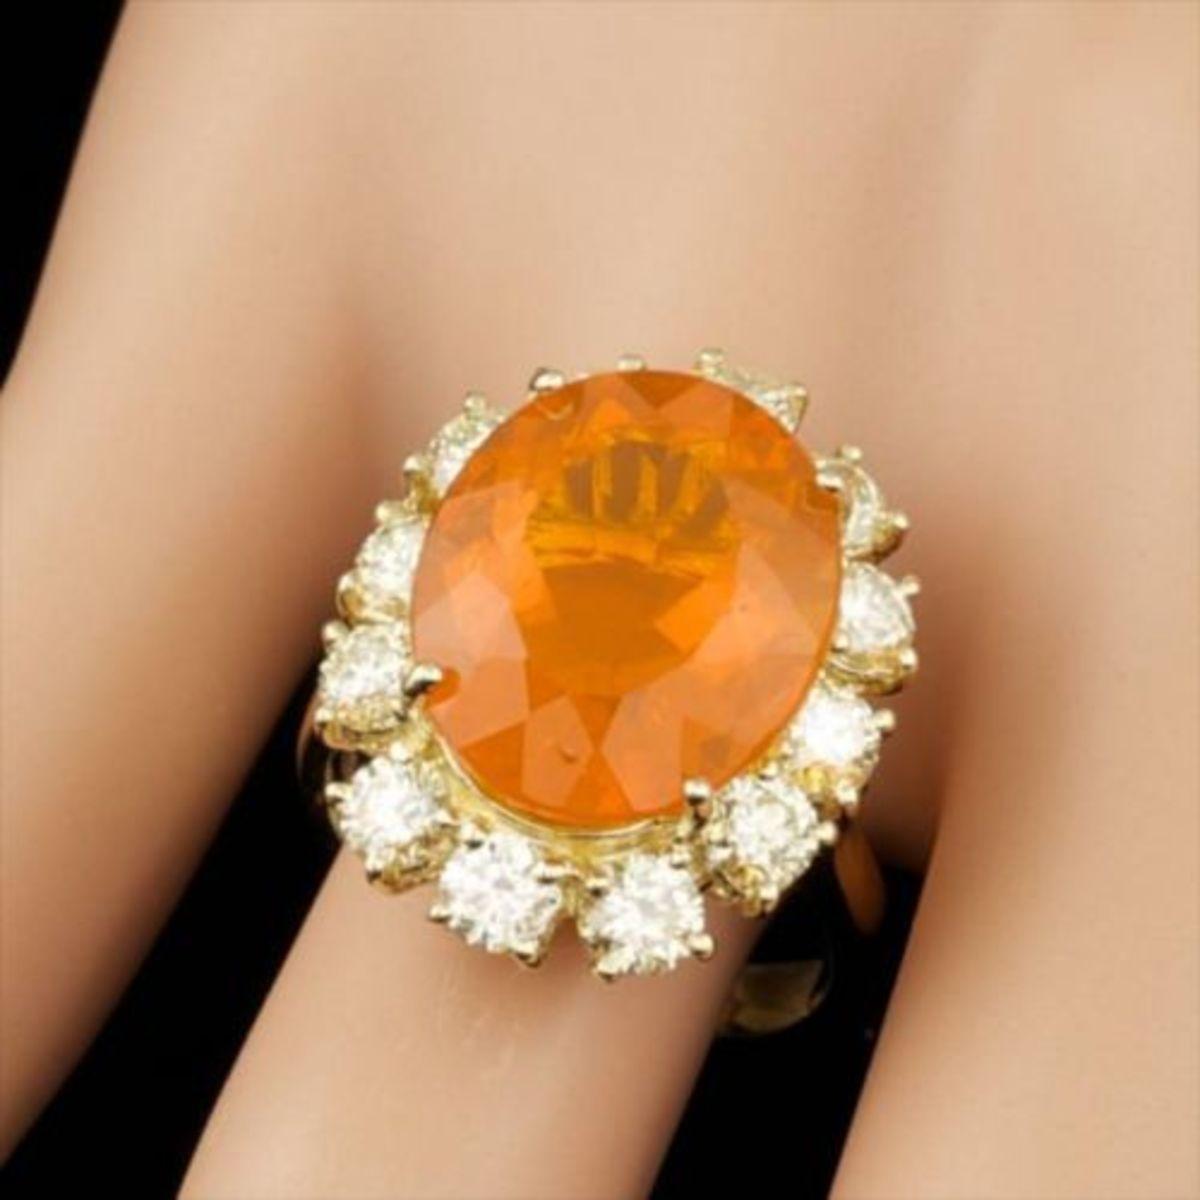 14K Yellow Gold 7.91ct Fire Opal and 2.41ct Diamond Ring